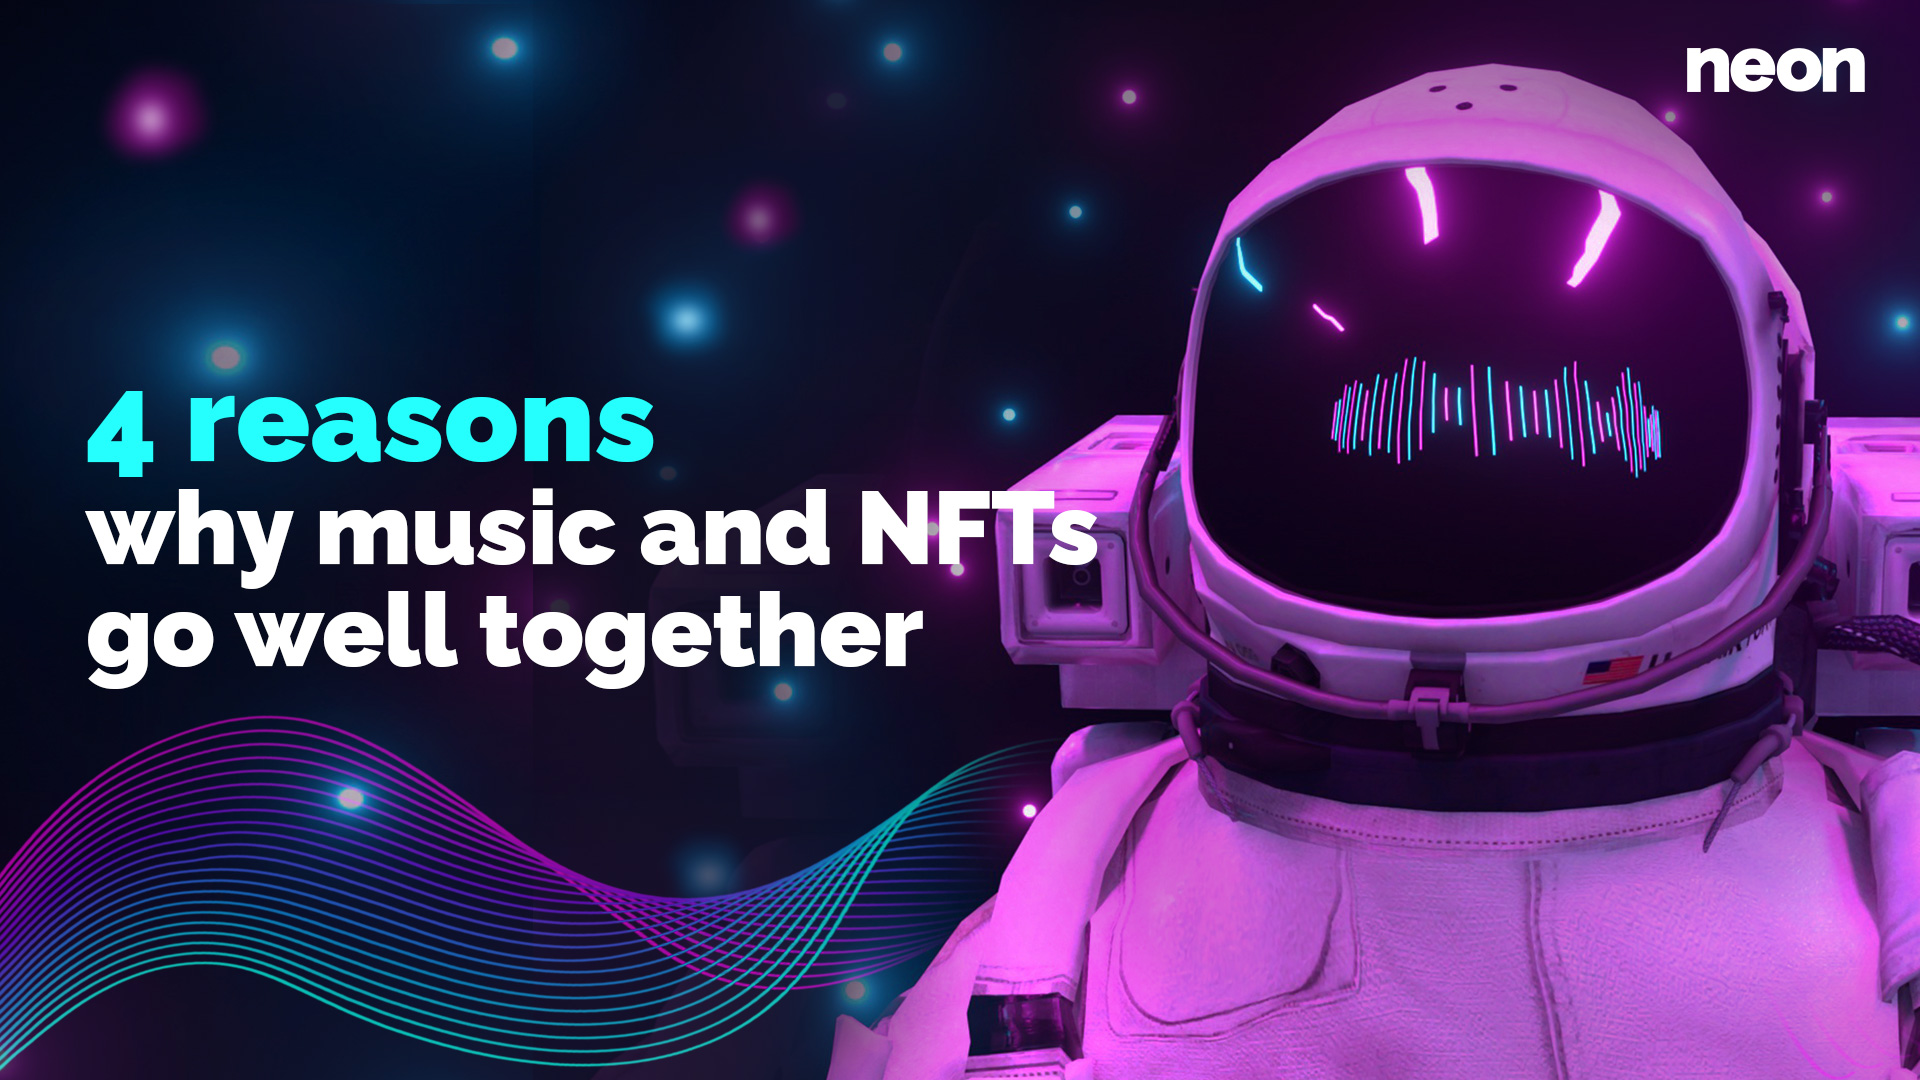 4 reasons why music and NFTs go well together